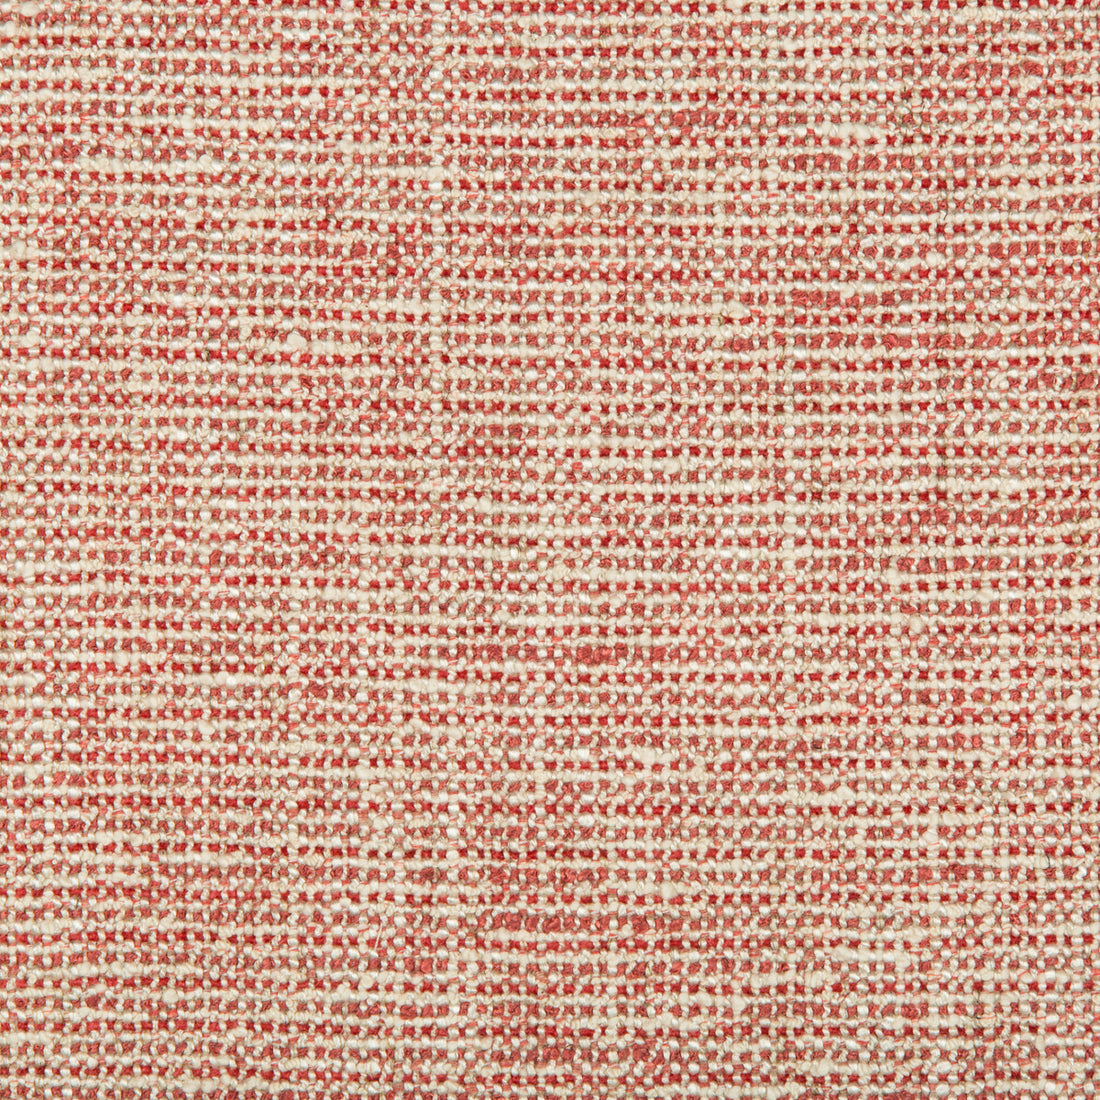 Varona fabric in berry color - pattern 2017160.79.0 - by Lee Jofa in the Westport collection